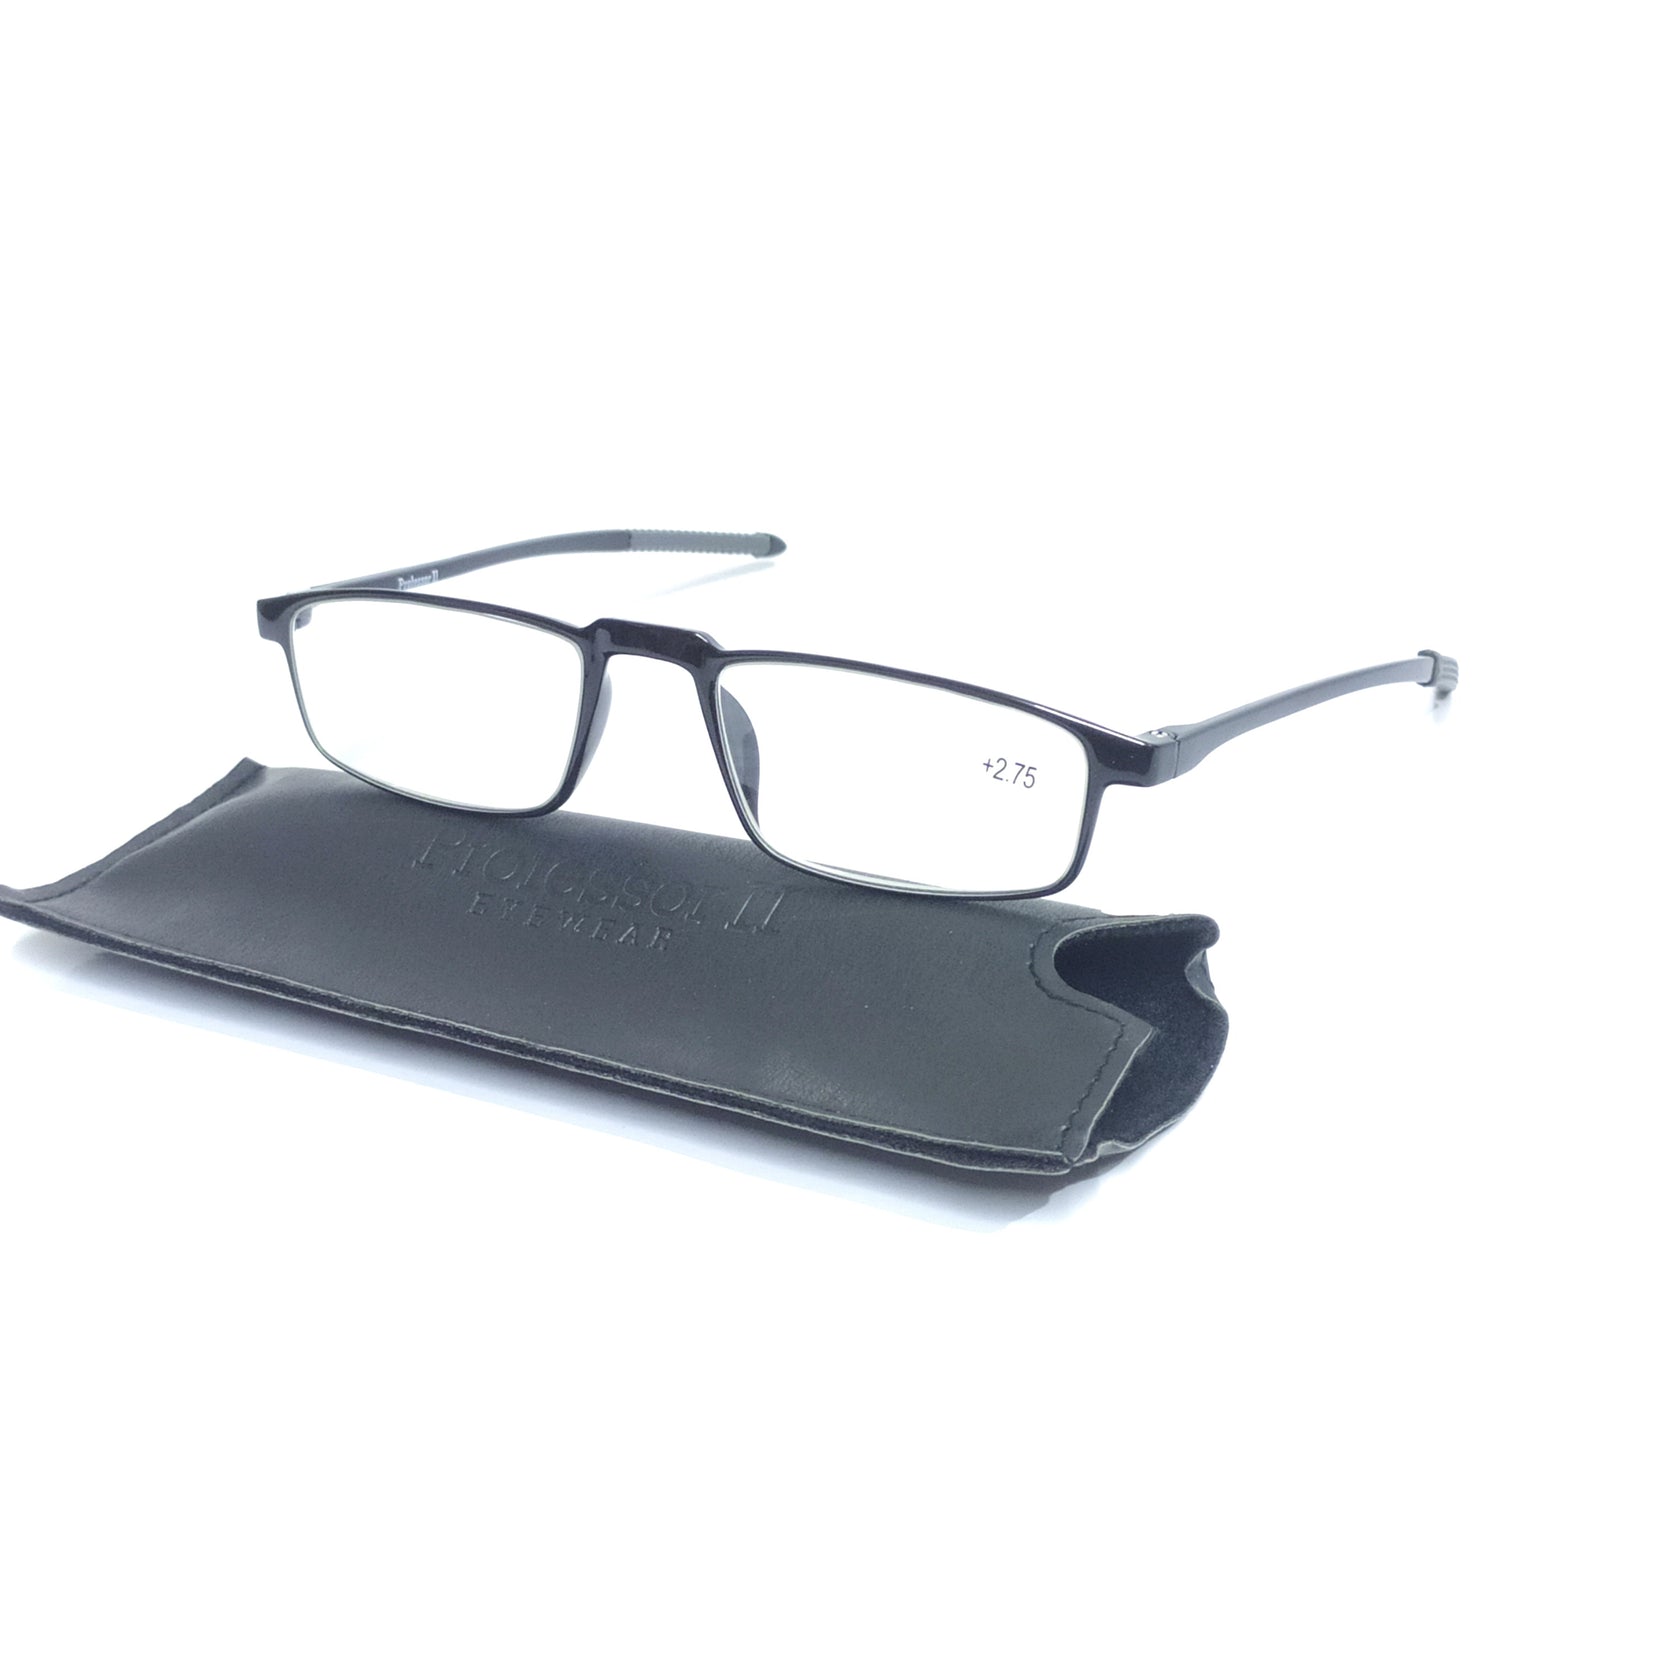 Buy Lightweight Reading Glasses for Men and Women Online in India ...